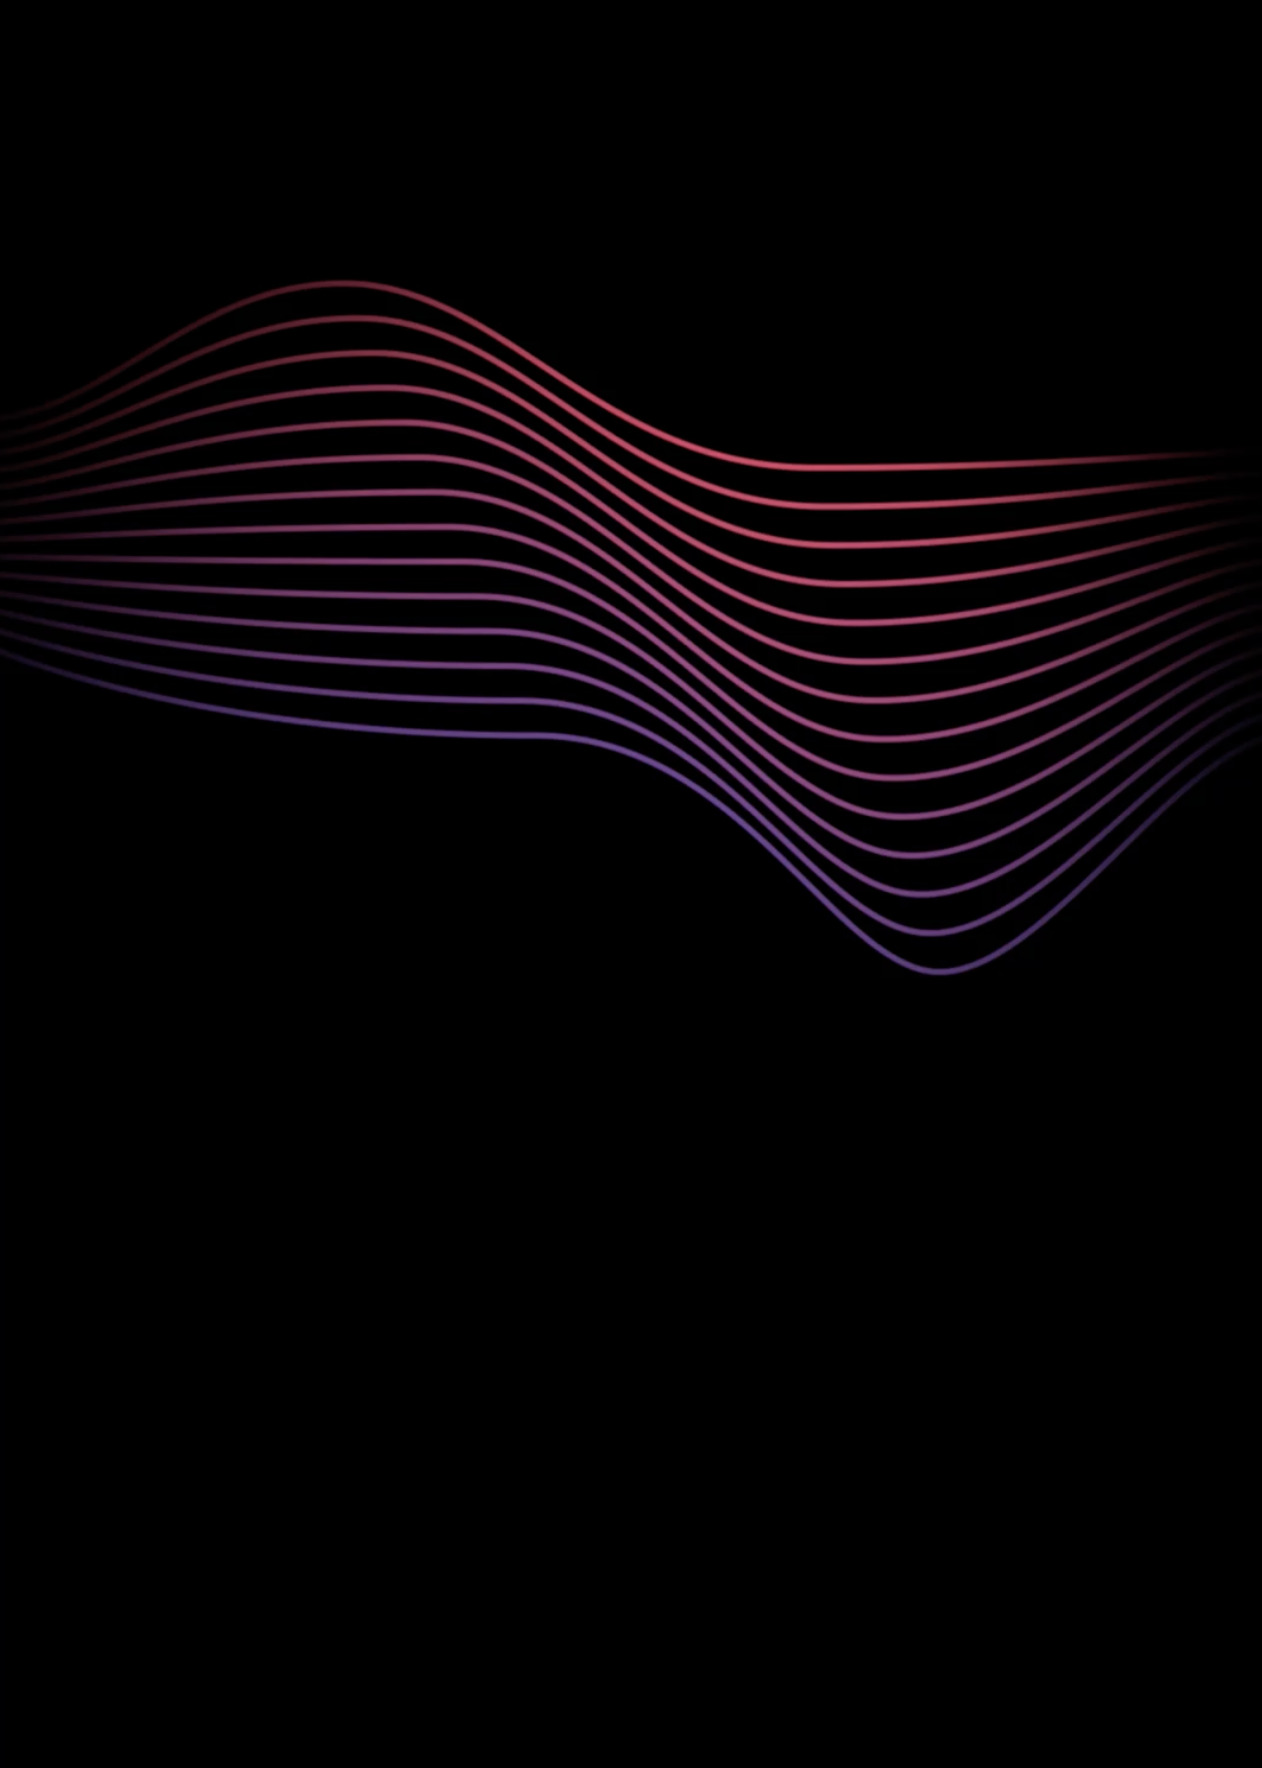 Pink and purple wavy graphic lines on a black background